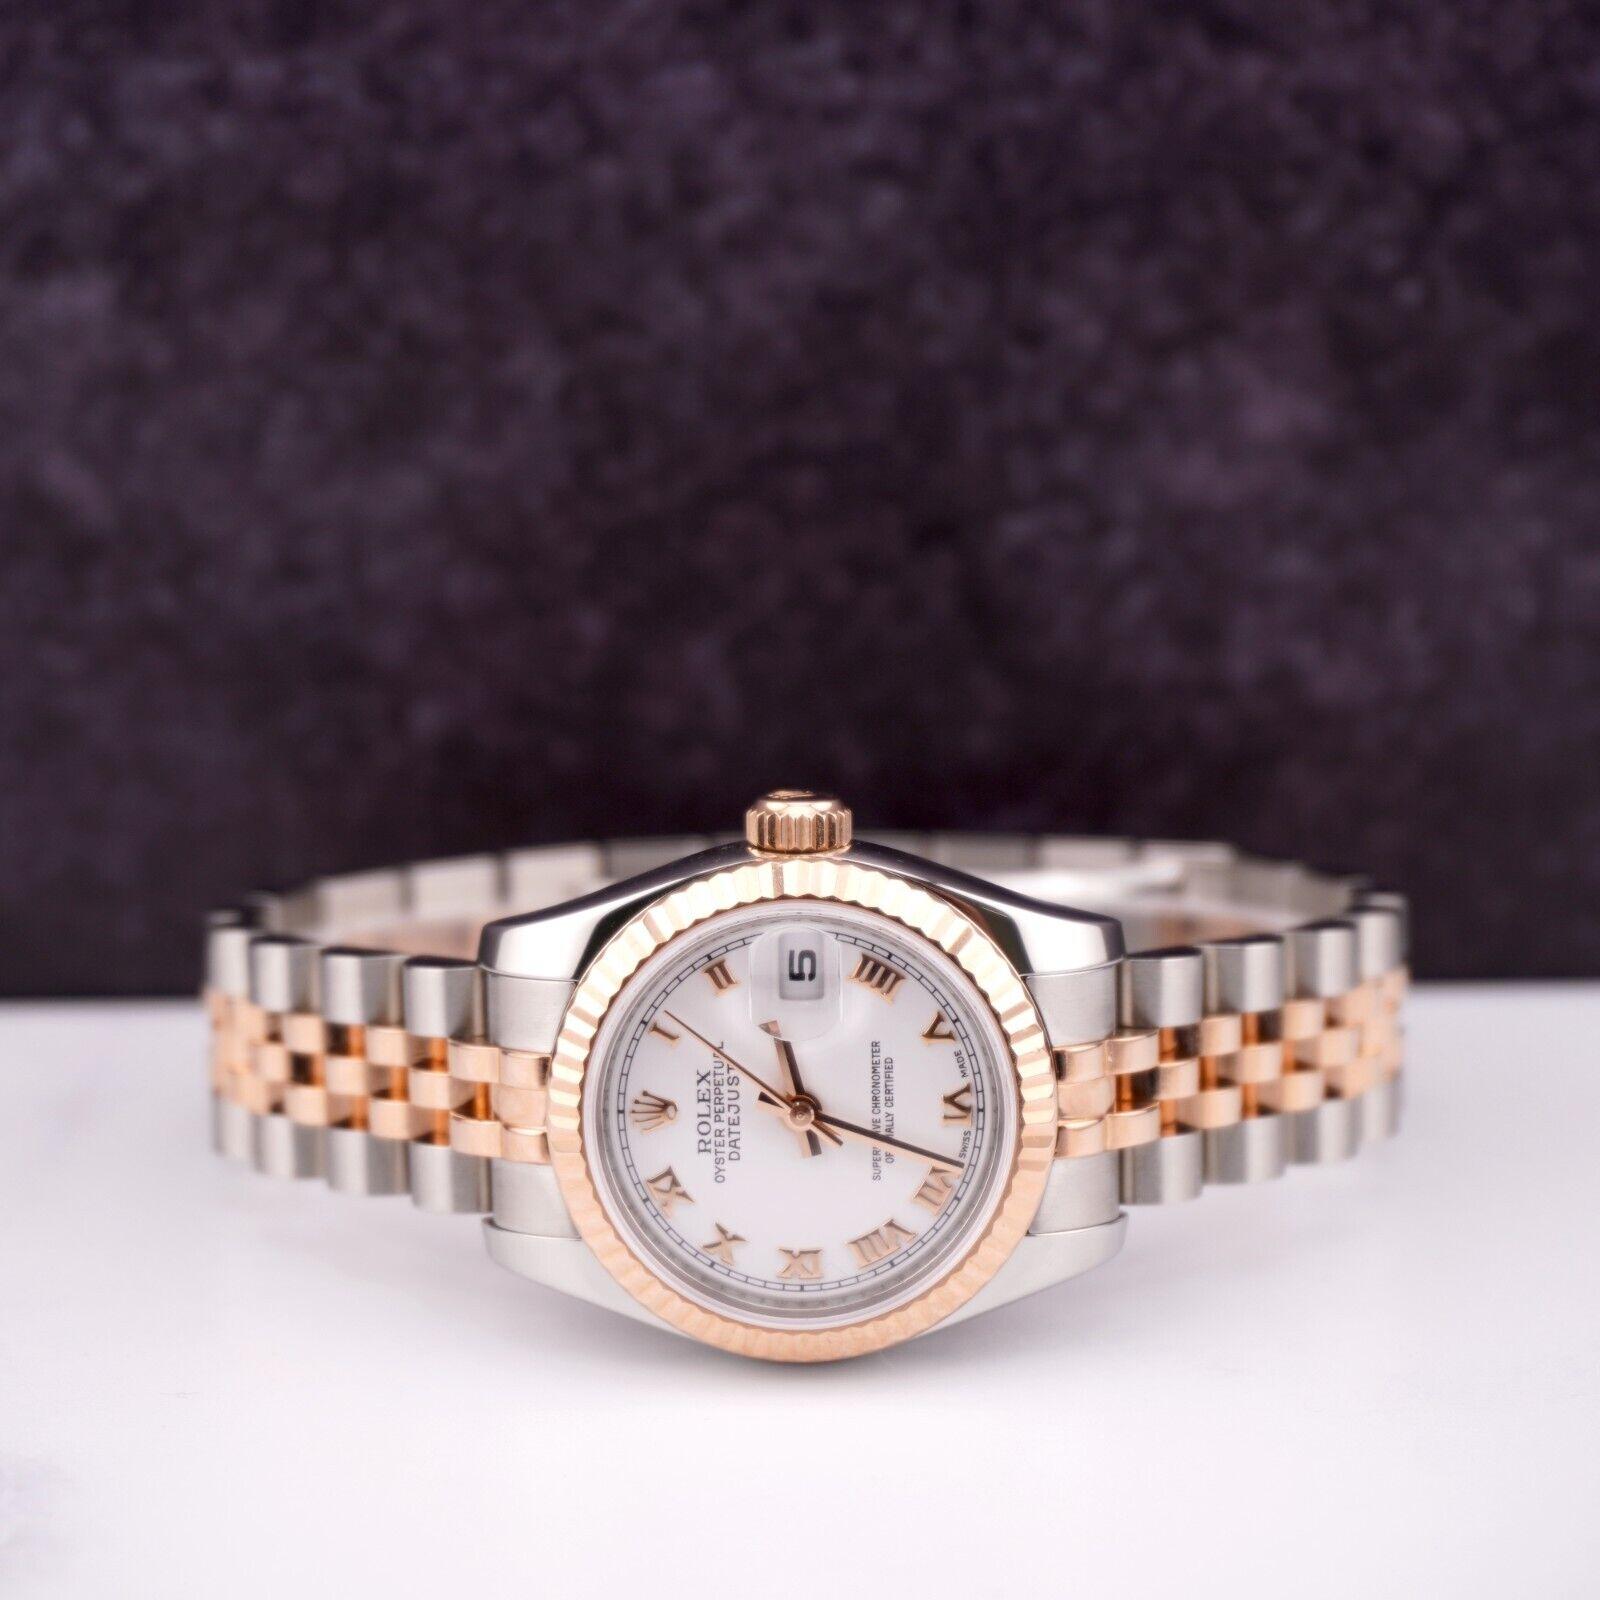 Rolex Datejust 26mm Watch

Pre-owned w/ Original Box & Card
100% Authentic Authenticity Card
Condition - (Excellent Condition) - See Pics
Watch Reference - 179171
Model - Datejust
Dial Color - White
Material - 18k Rose Gold/Stainless Steel
Watch